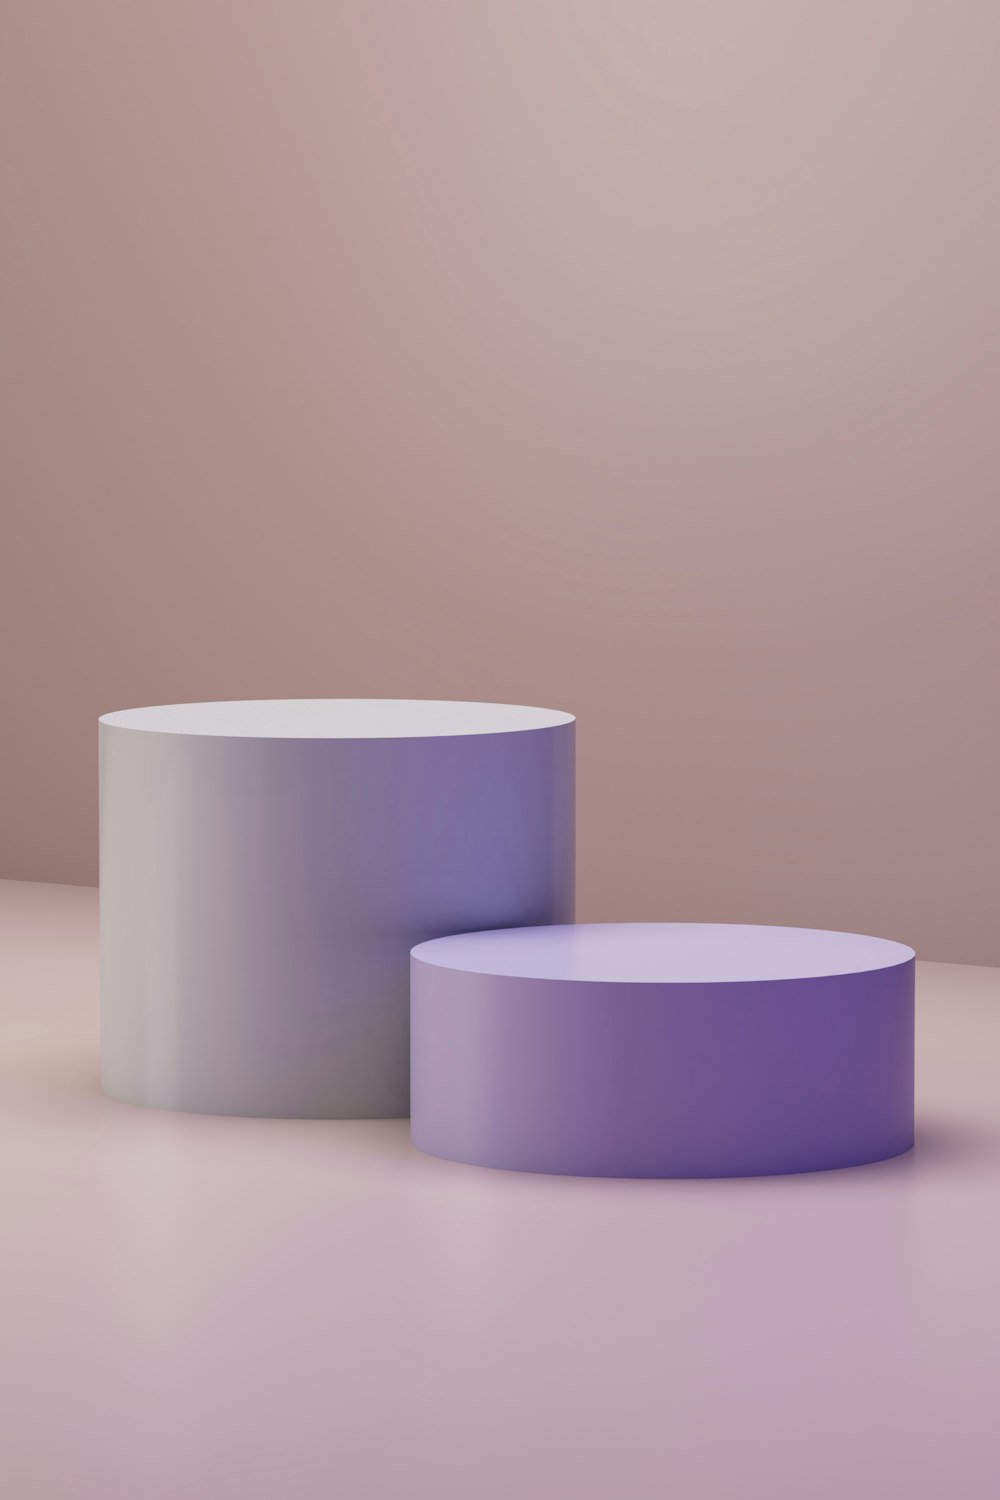 a white and purple object sitting on top of a table